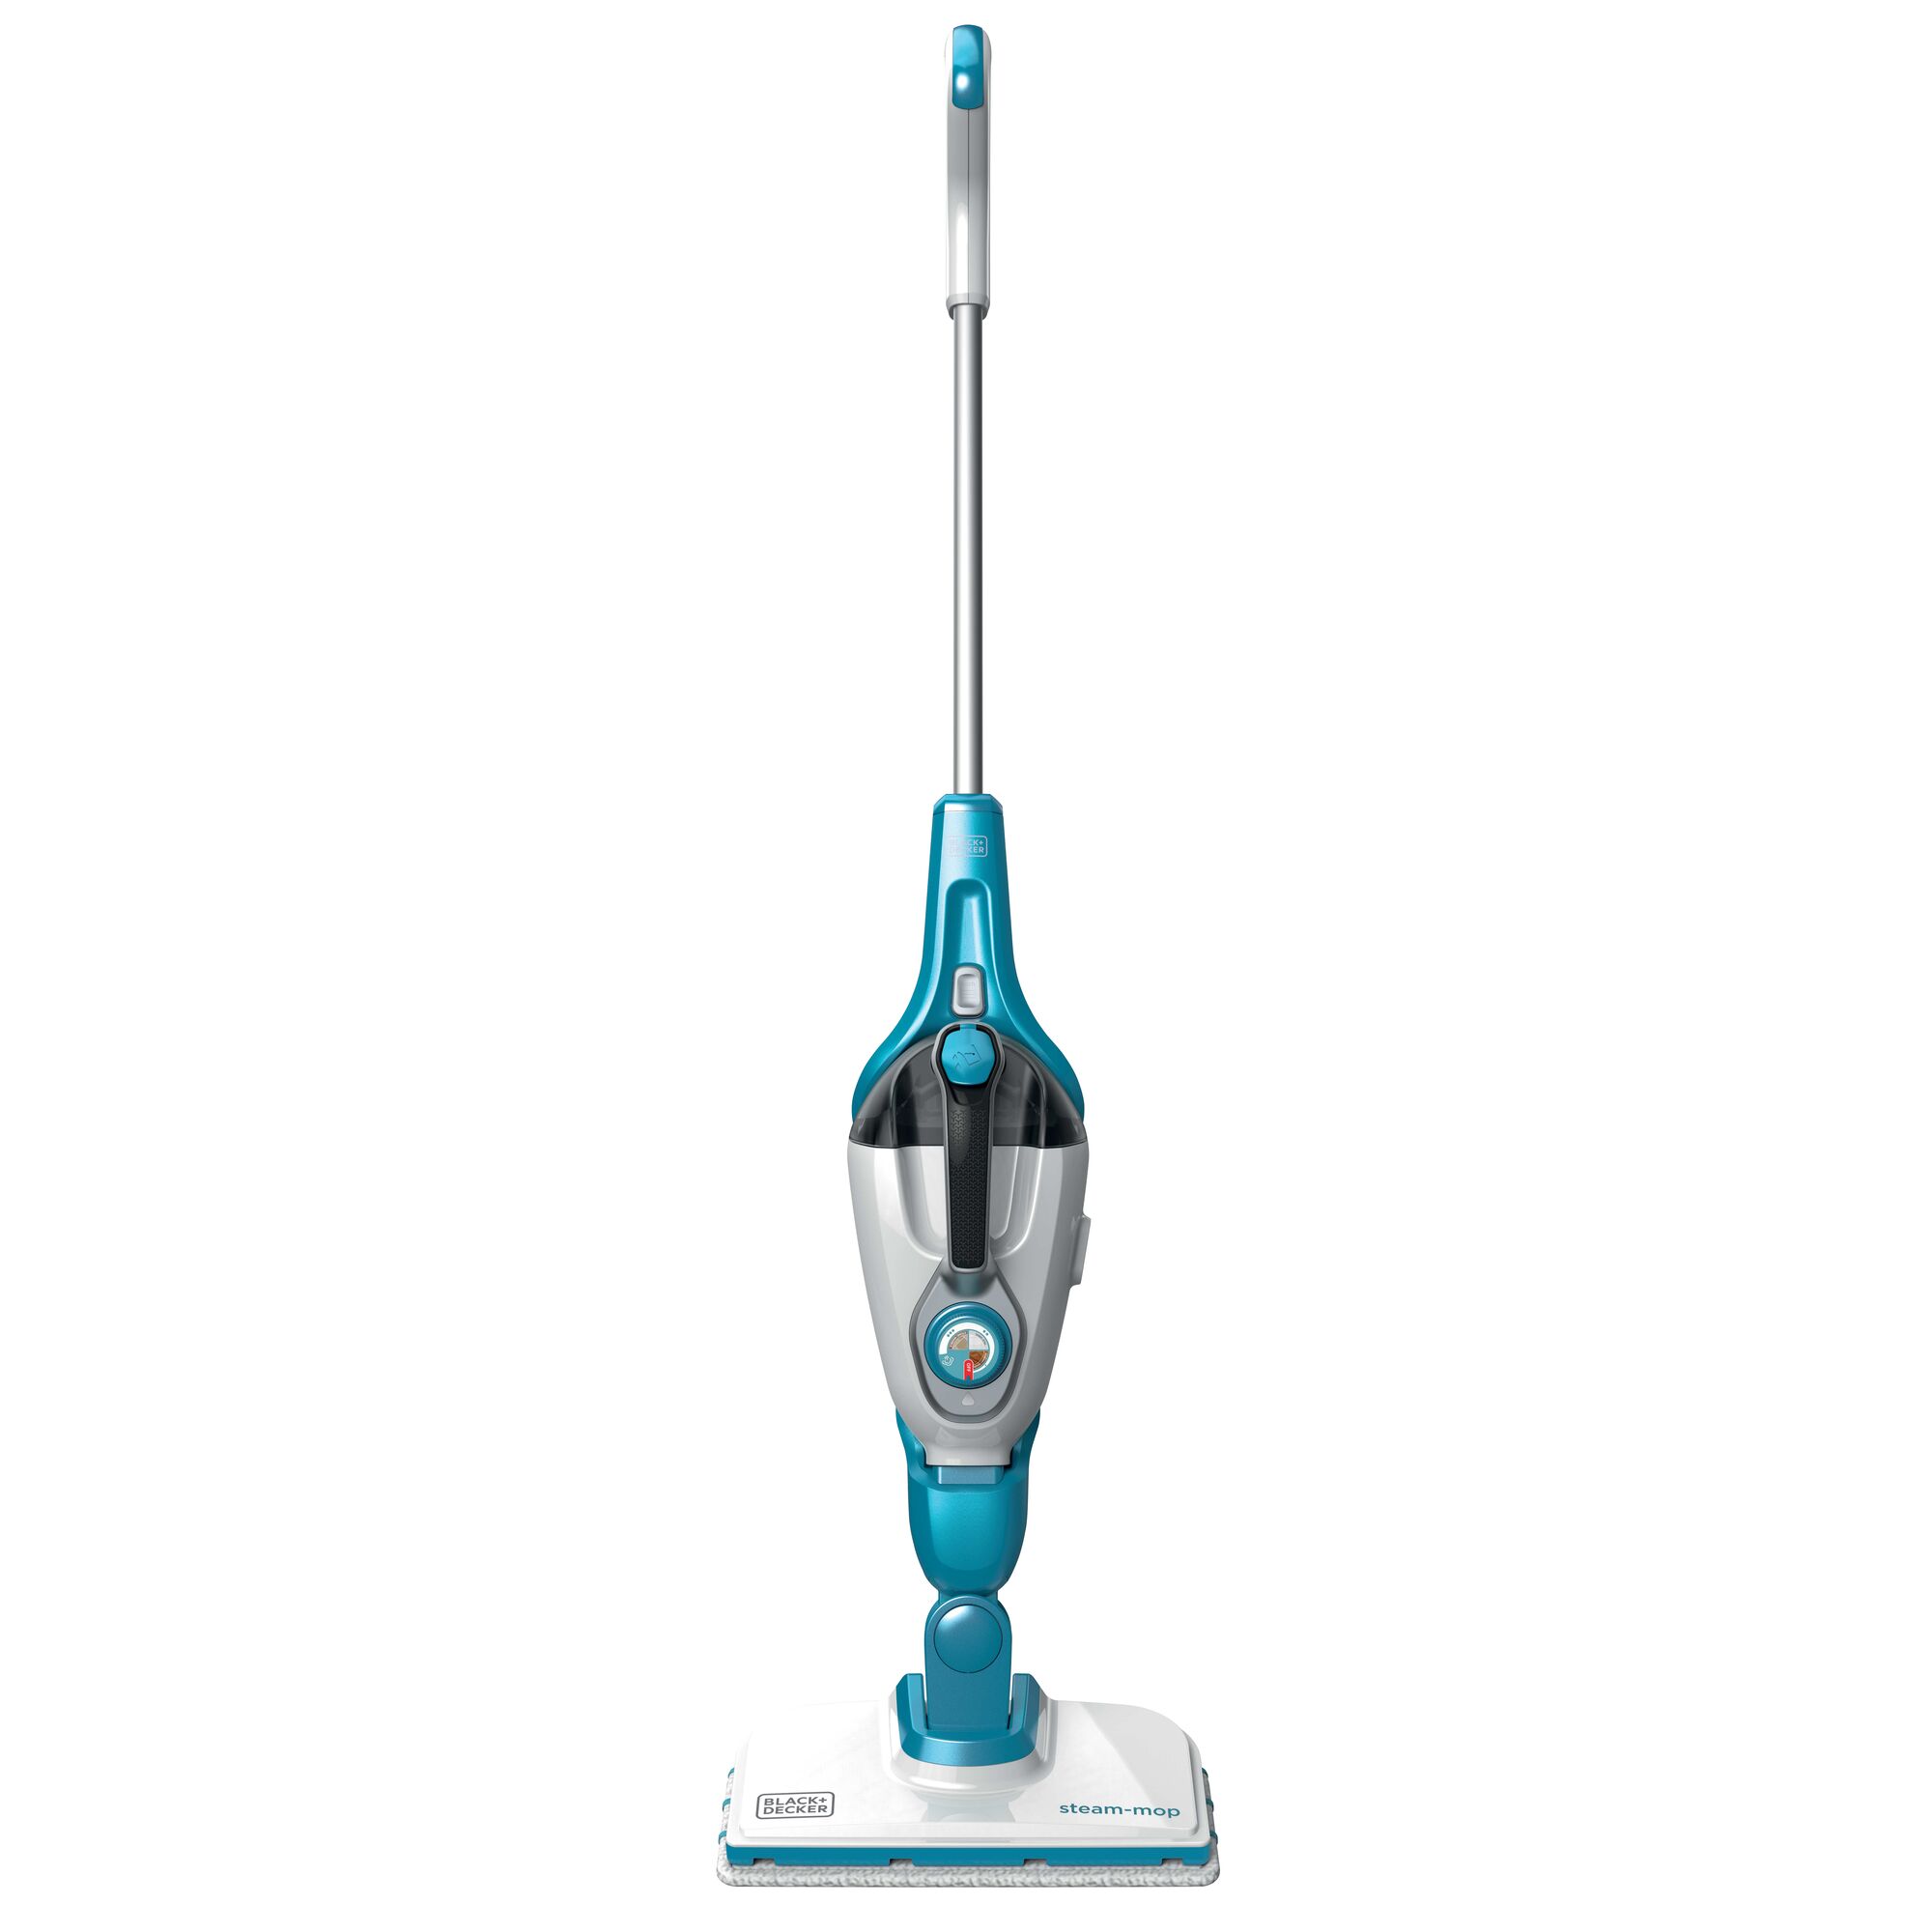 5 in 1 steam mop and portable steamer.